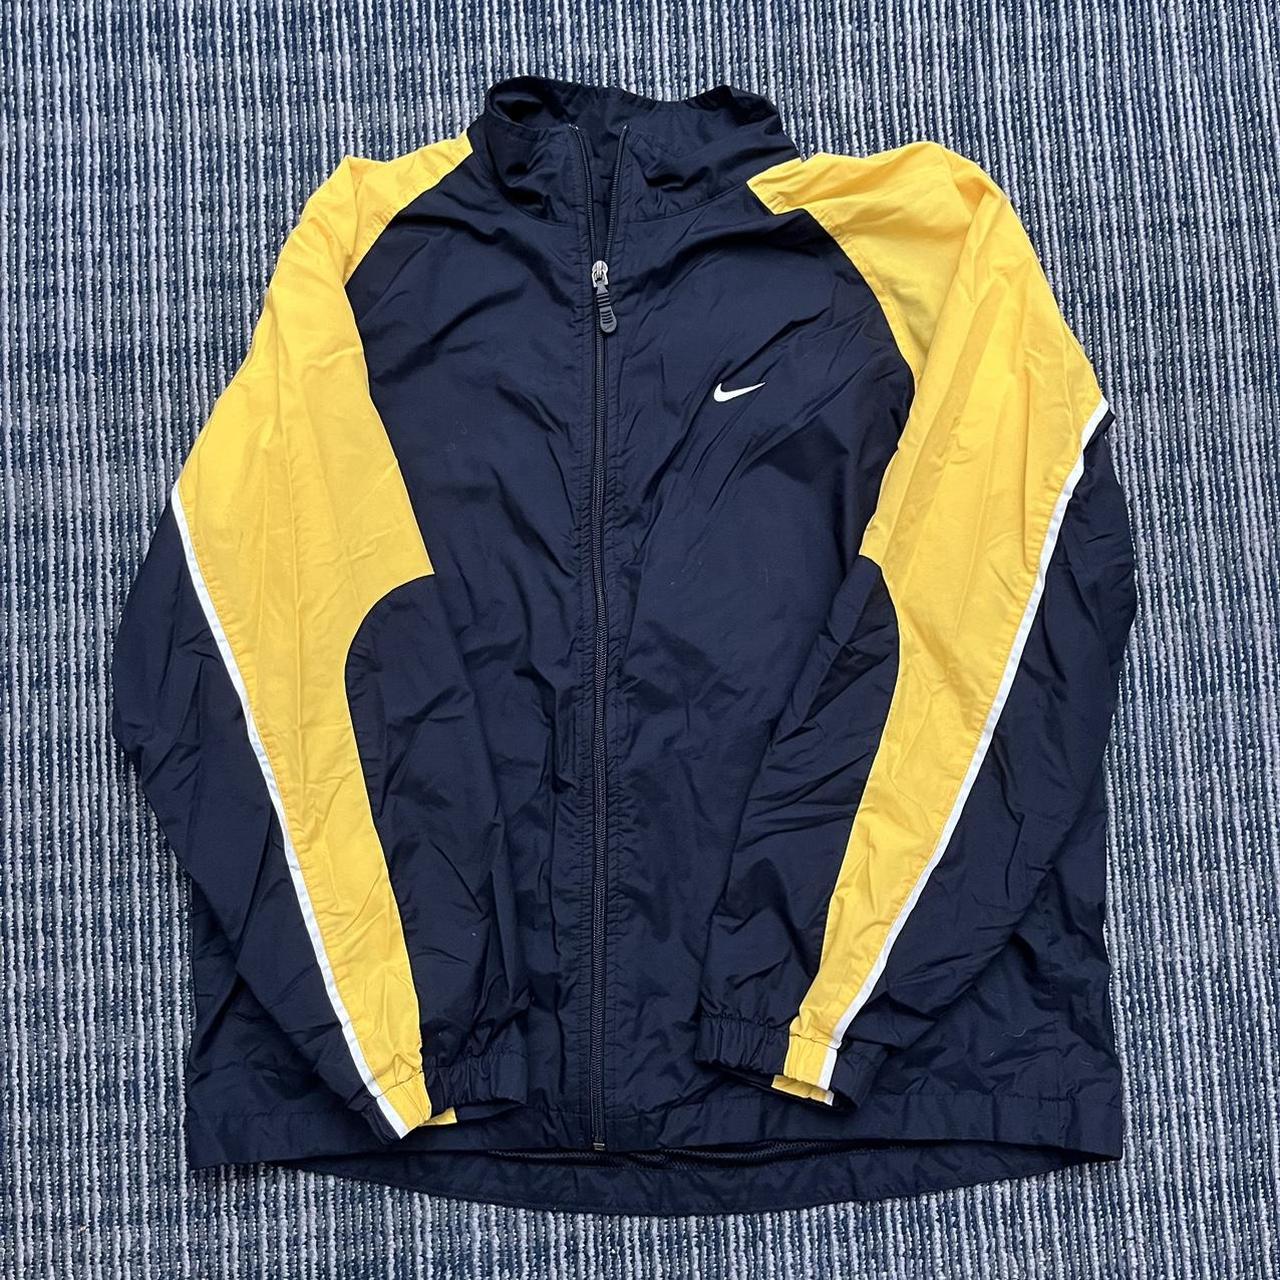 Adult Large Cyber Y2K Simple Nike Yellow Accented... - Depop